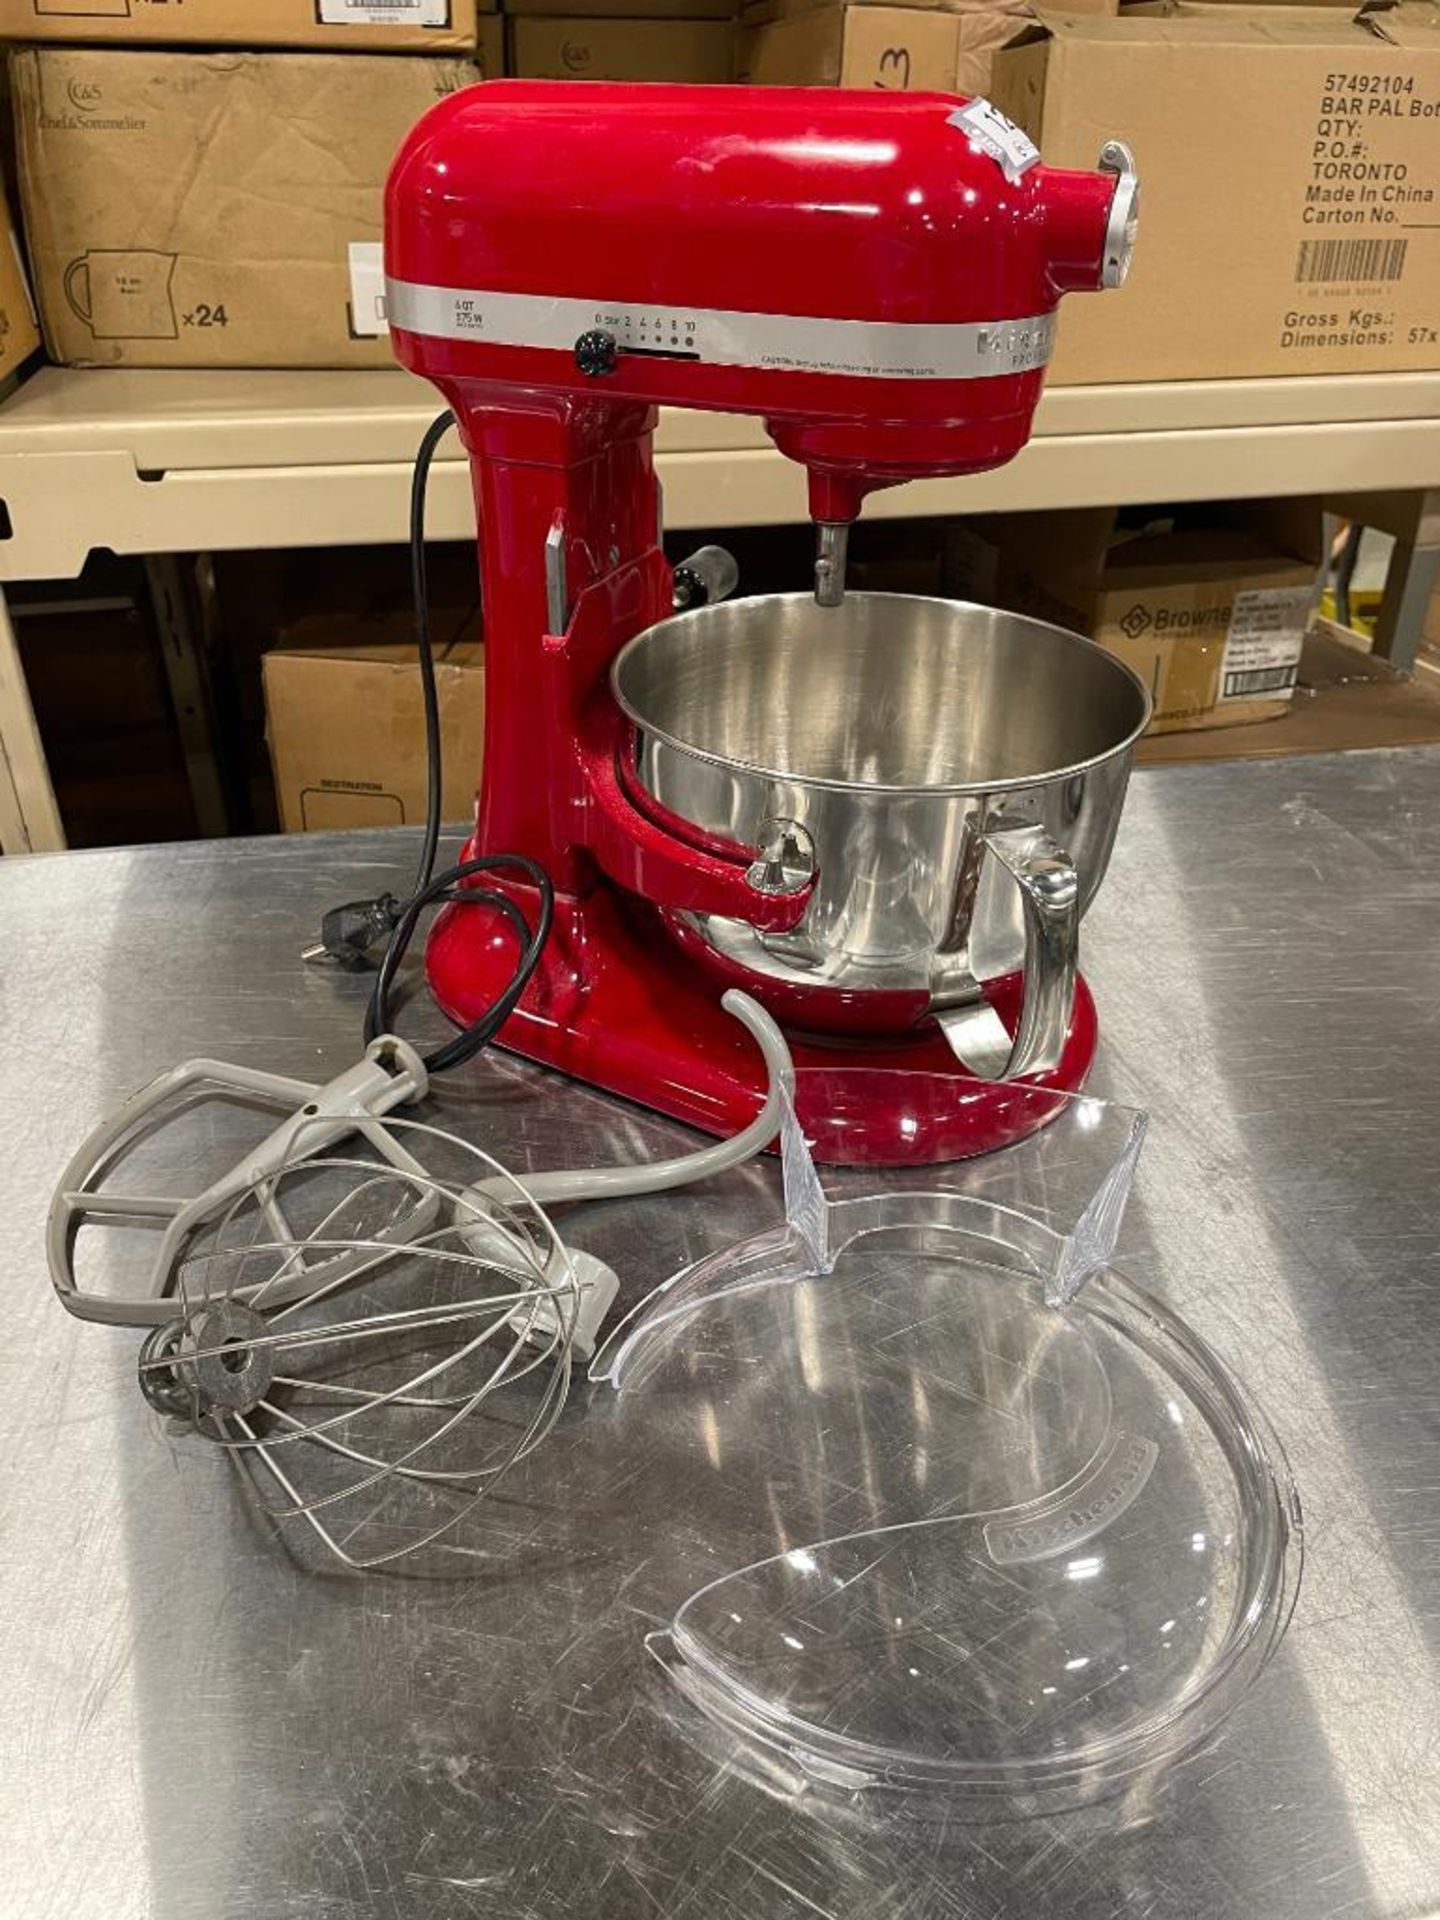 KITCHENAID PROFESSIONAL 600 SERIES 6-QUART BOWL-LIFT STAND MIXER WITH BOWL & ATTACHMENTS - Image 7 of 14